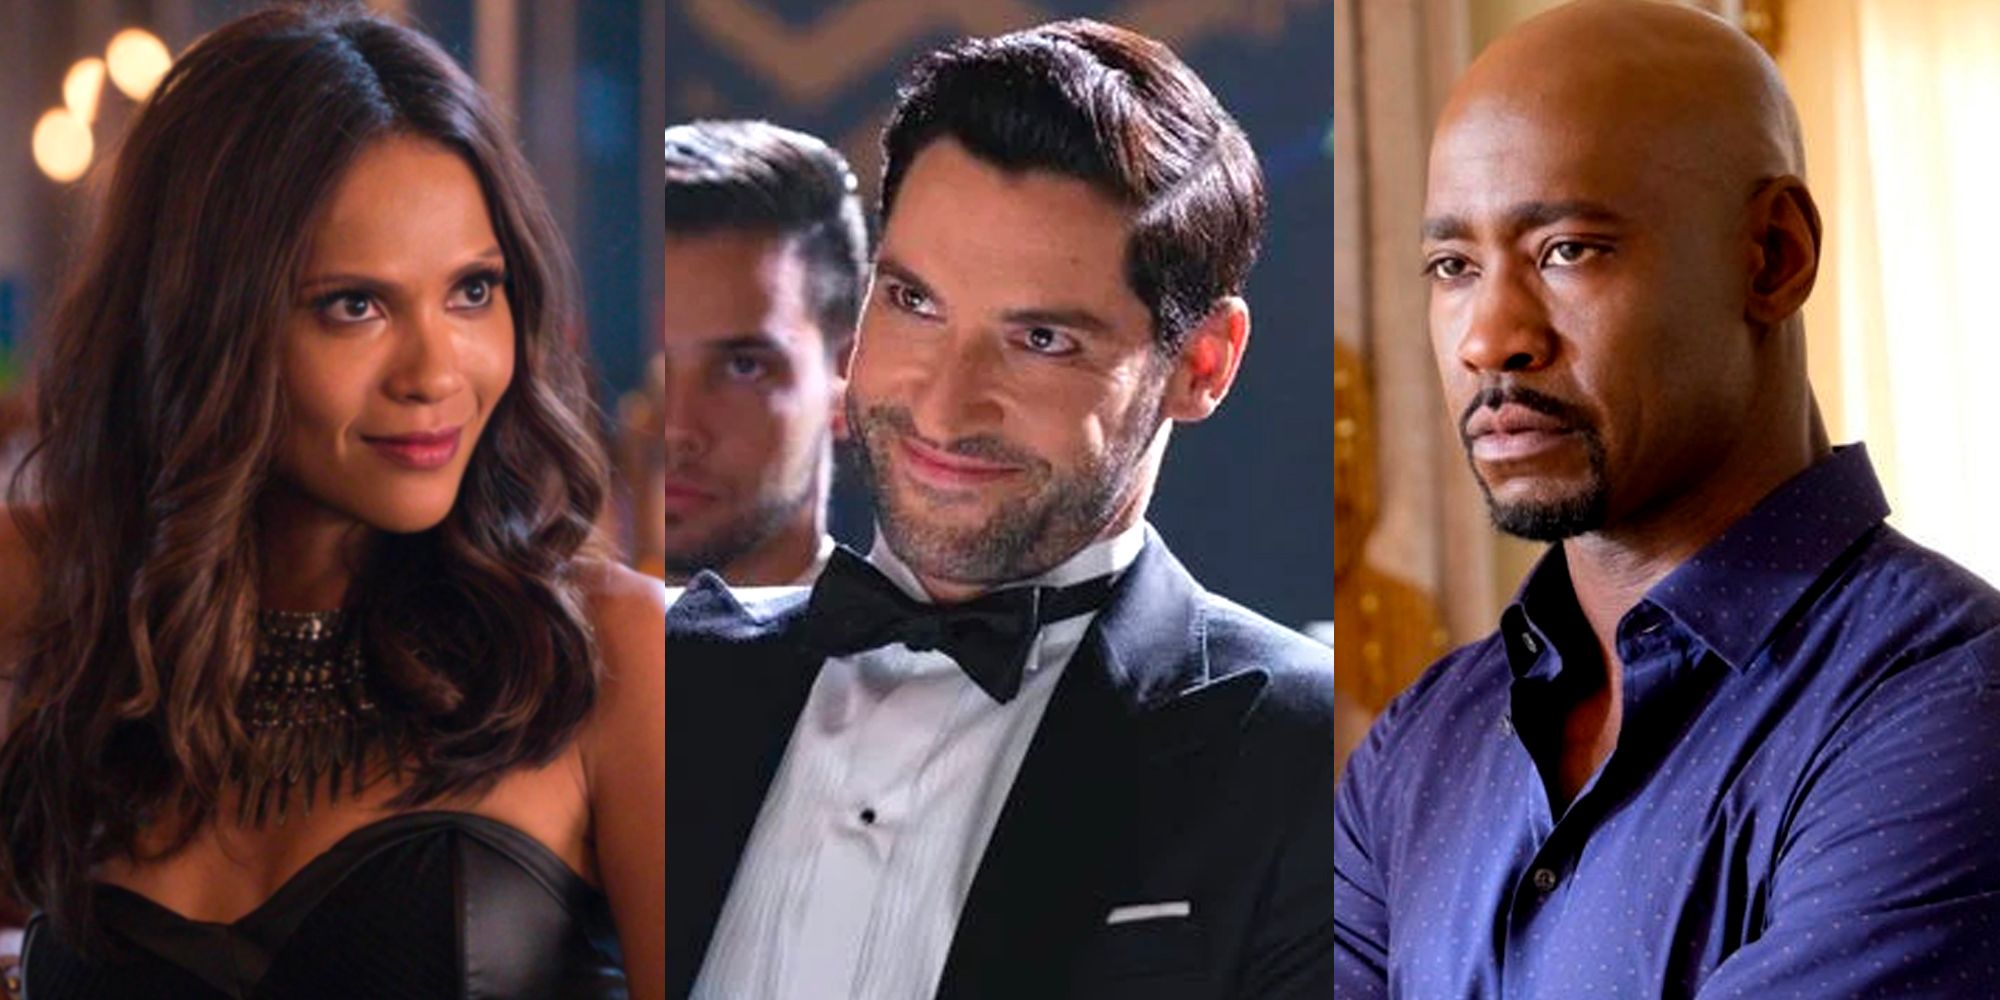 A split image features Maze, Lucifer, and Amenadiel in the TV series Lucifer